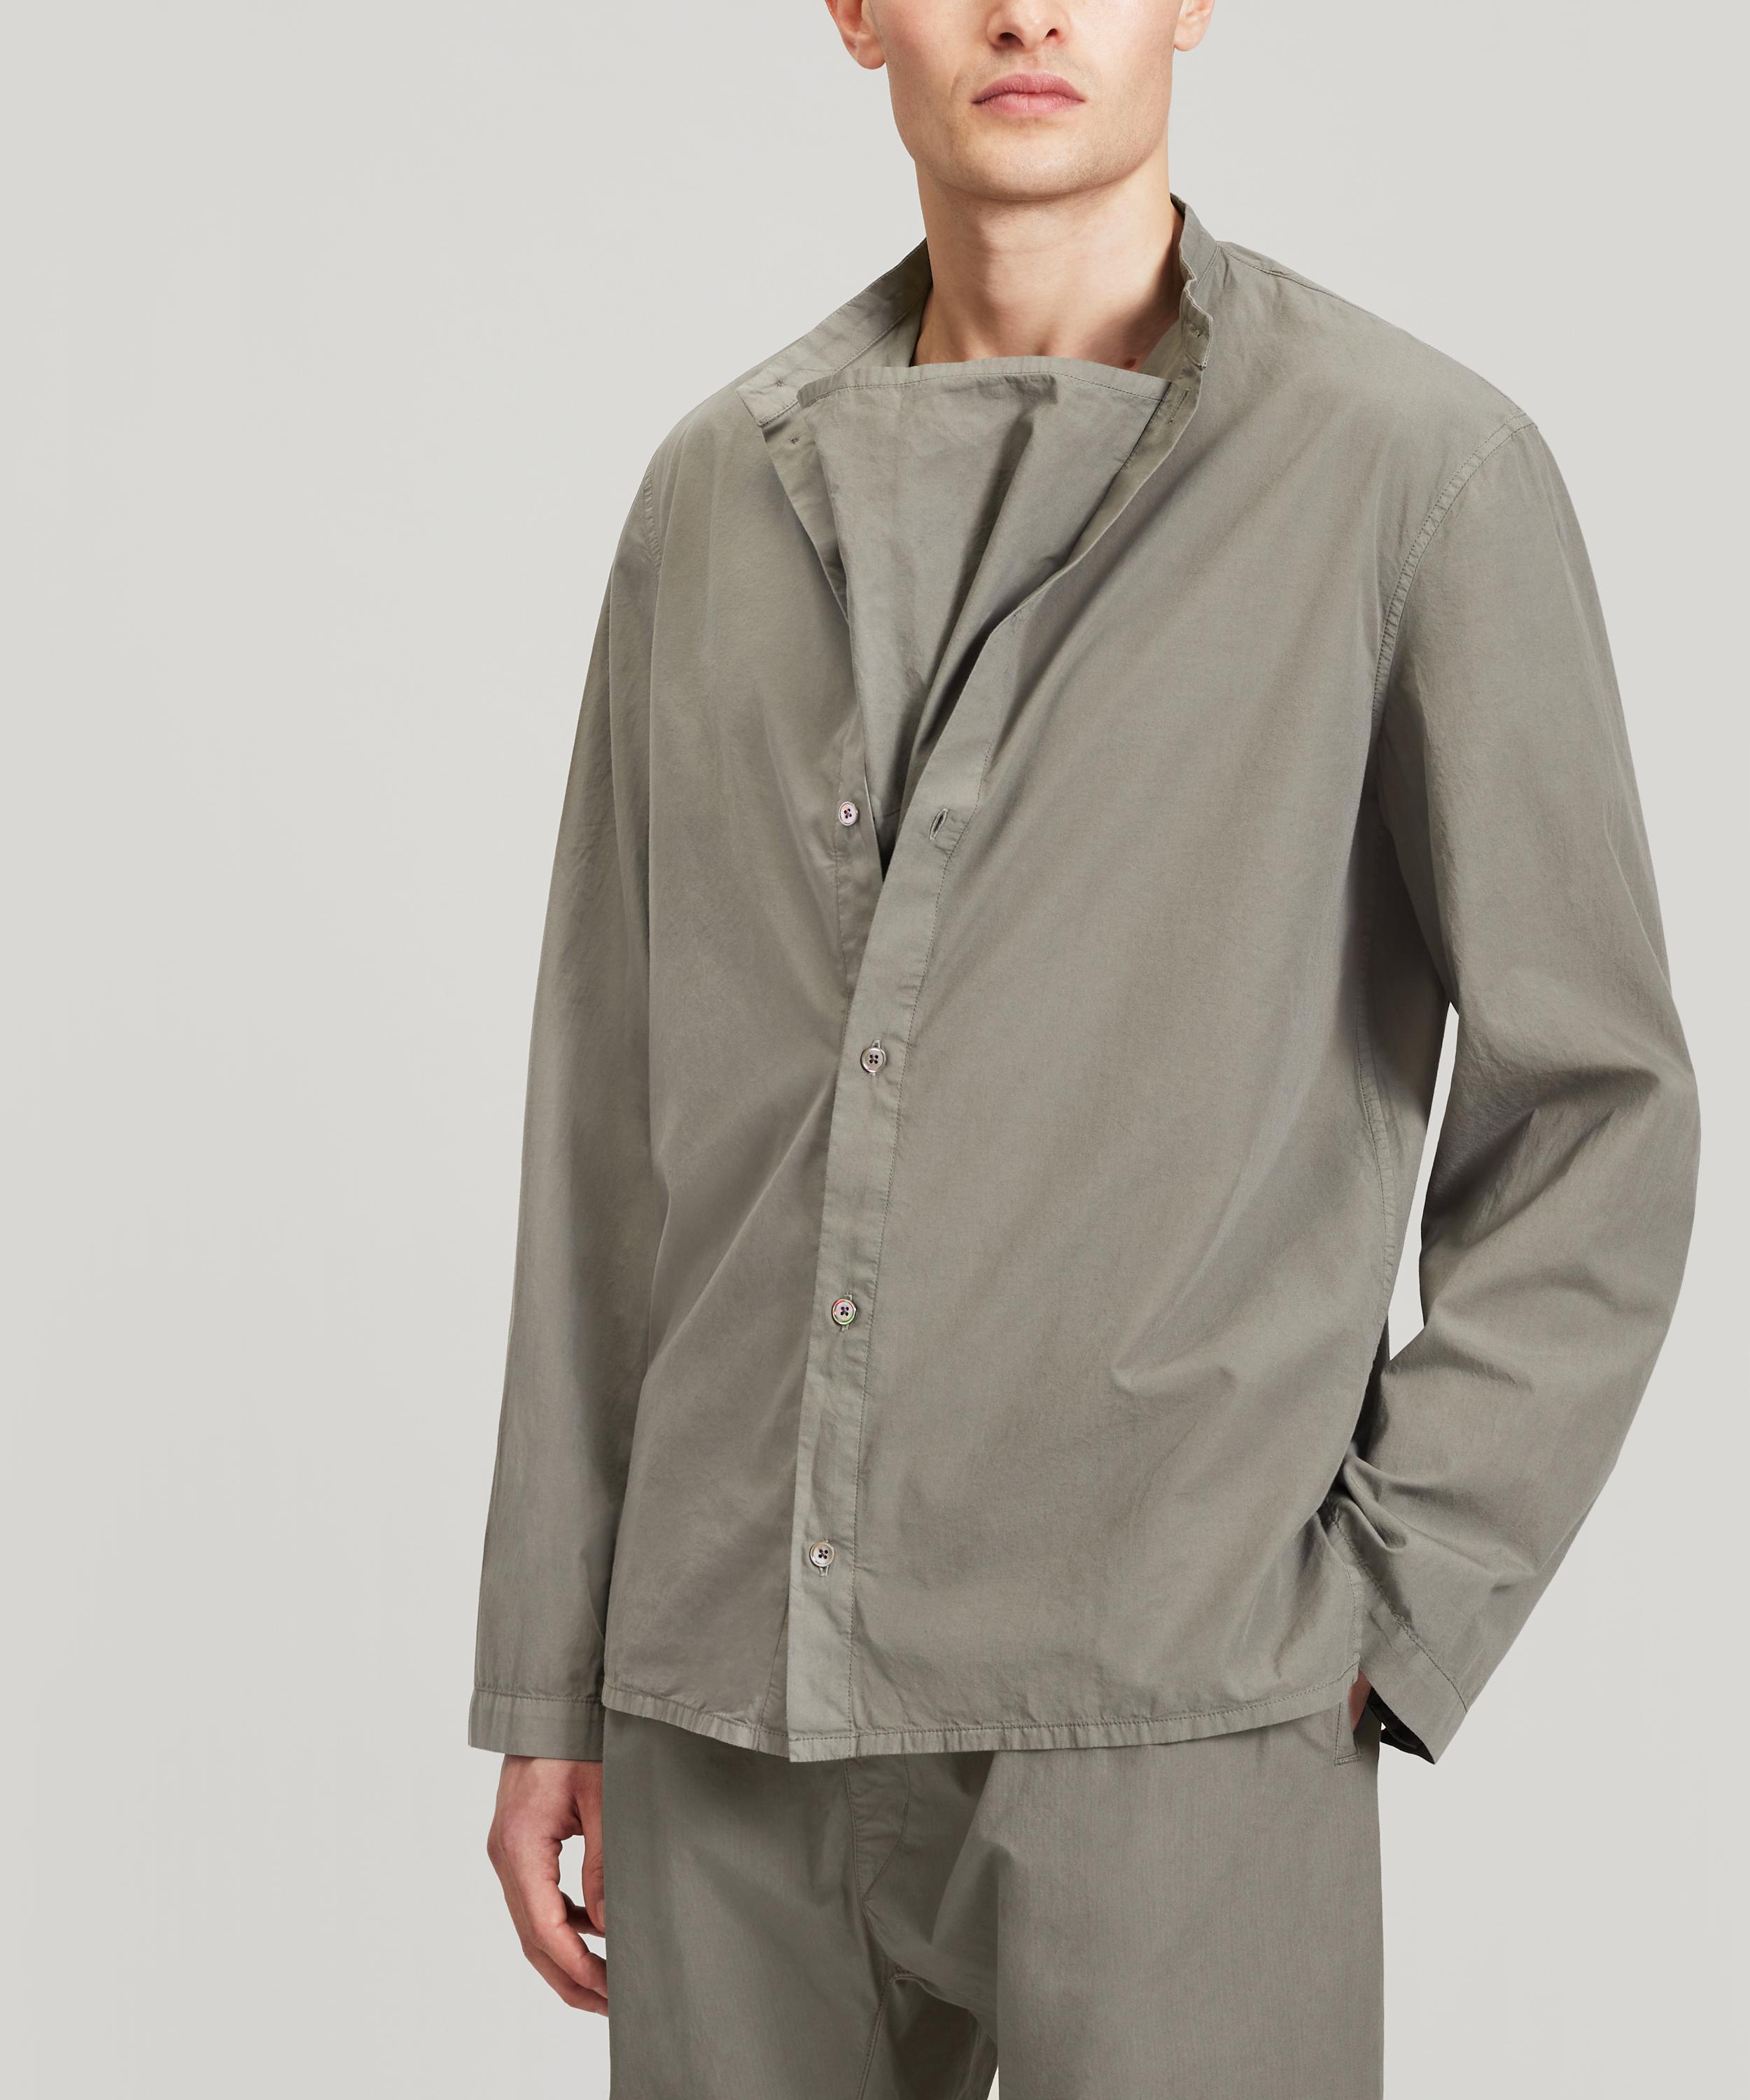 Lemaire Long-sleeve Blouse Top in Ash Grey (Grey) for Men - Lyst